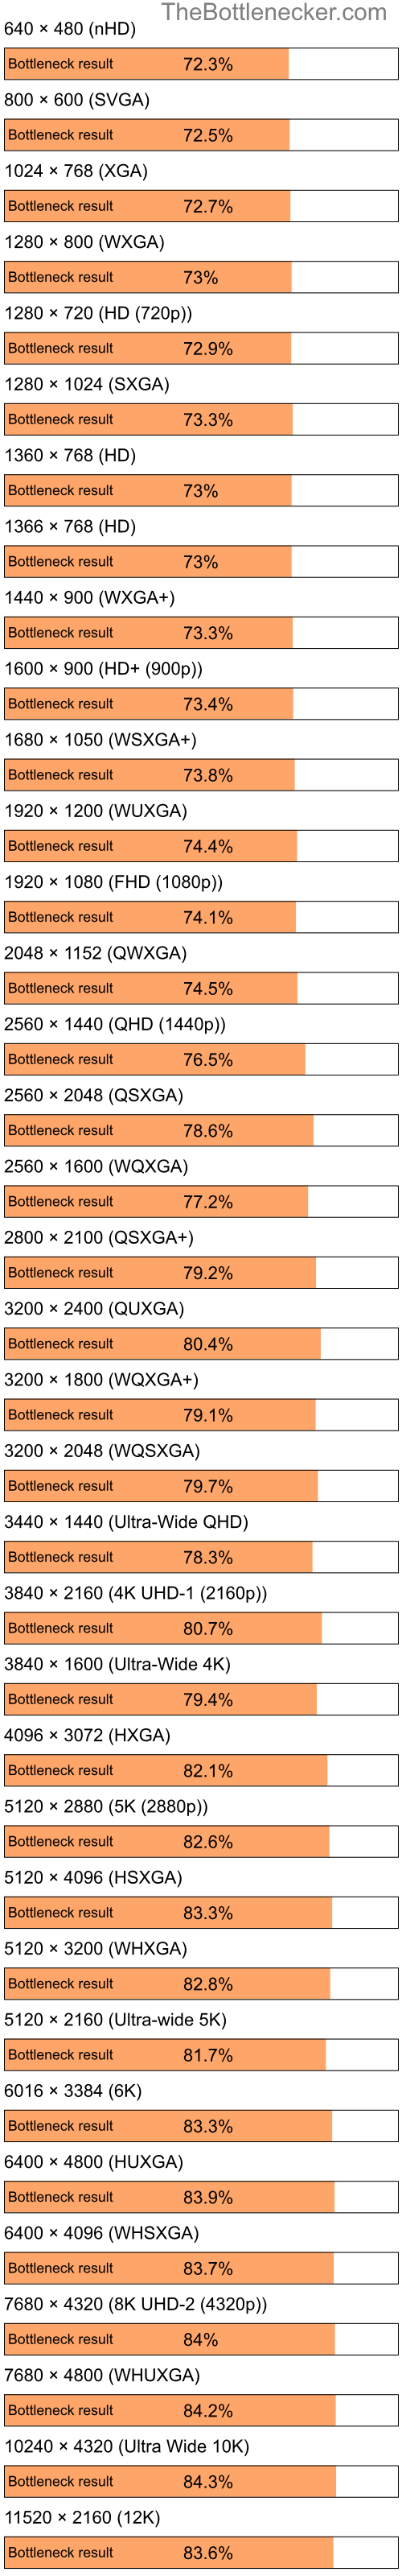 Bottleneck results by resolution for Intel Pentium 4 and AMD Mobility Radeon X300 in Processor Intense Tasks